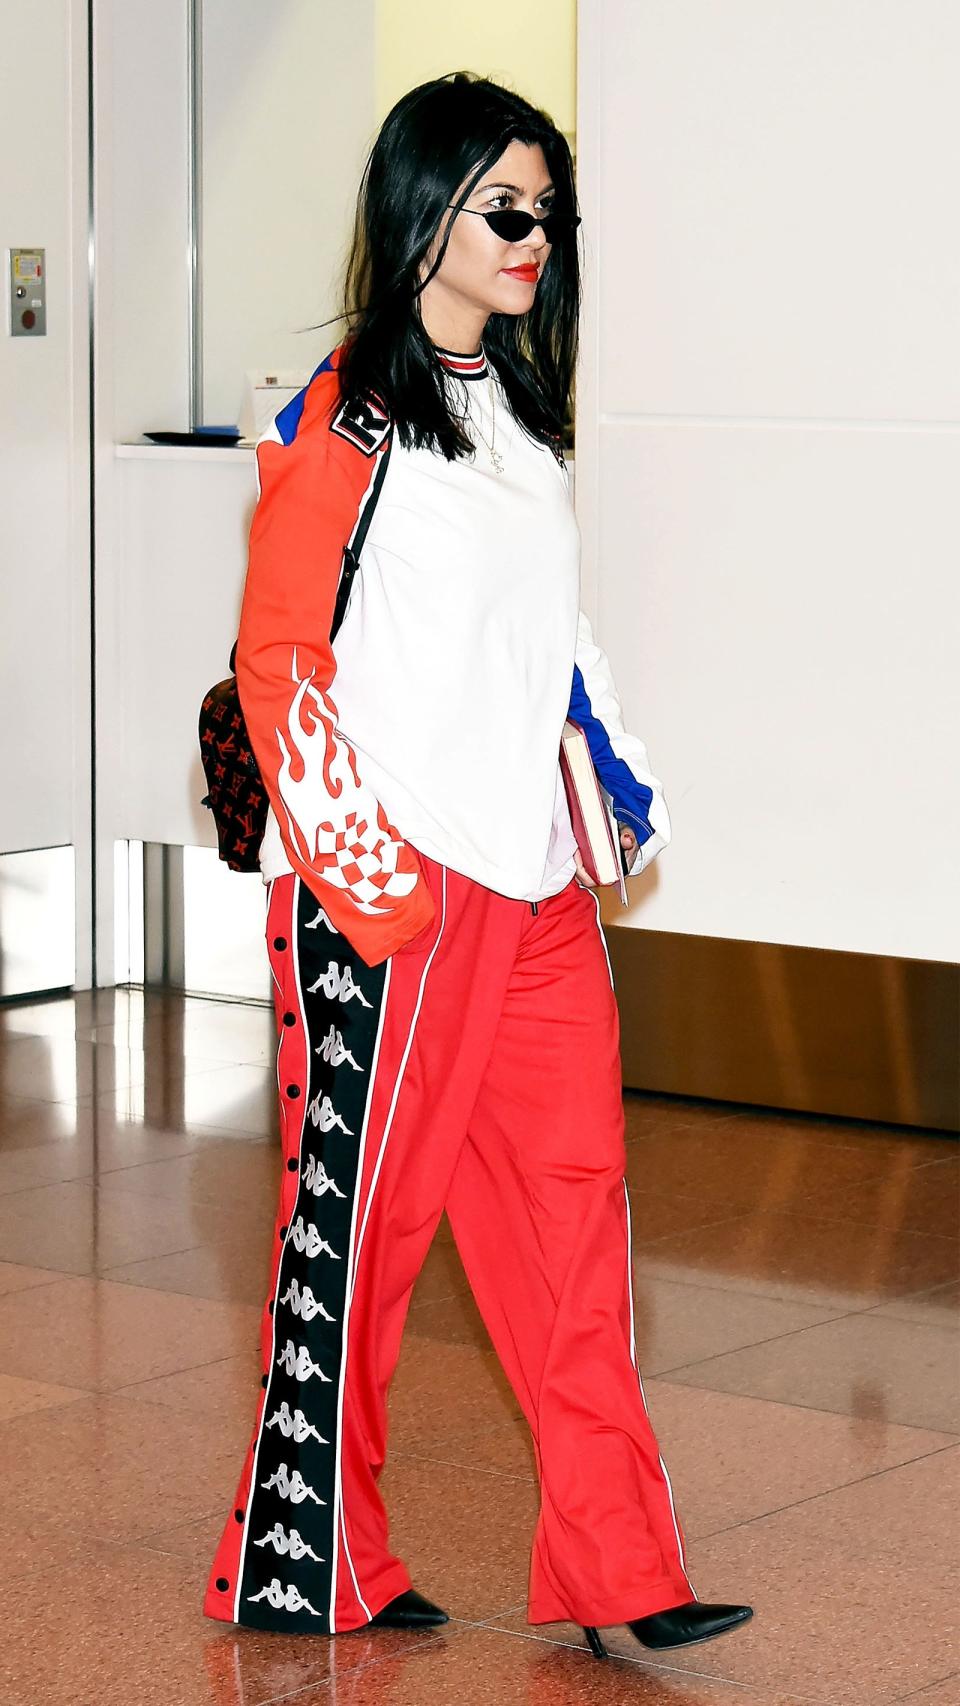 The travel take on a high-low mix: comfy track pants for hours on the plane, pointy-toe boots to strut off after landing.